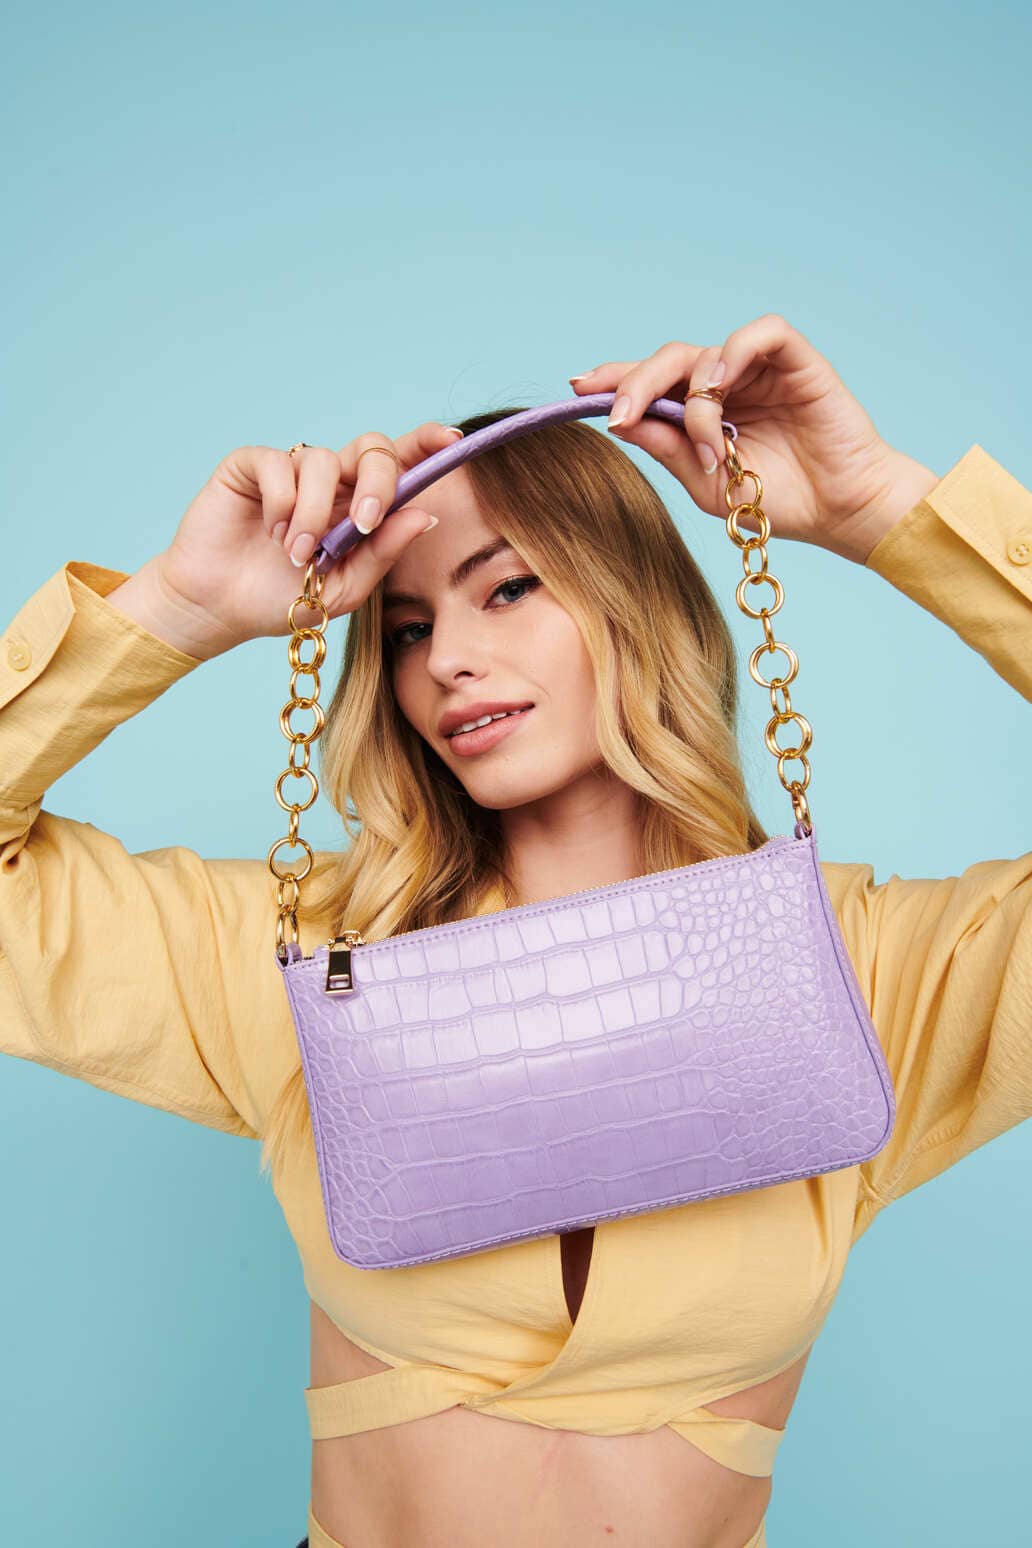 A girl in a yellow top holding a purple purse in front of a blue background	